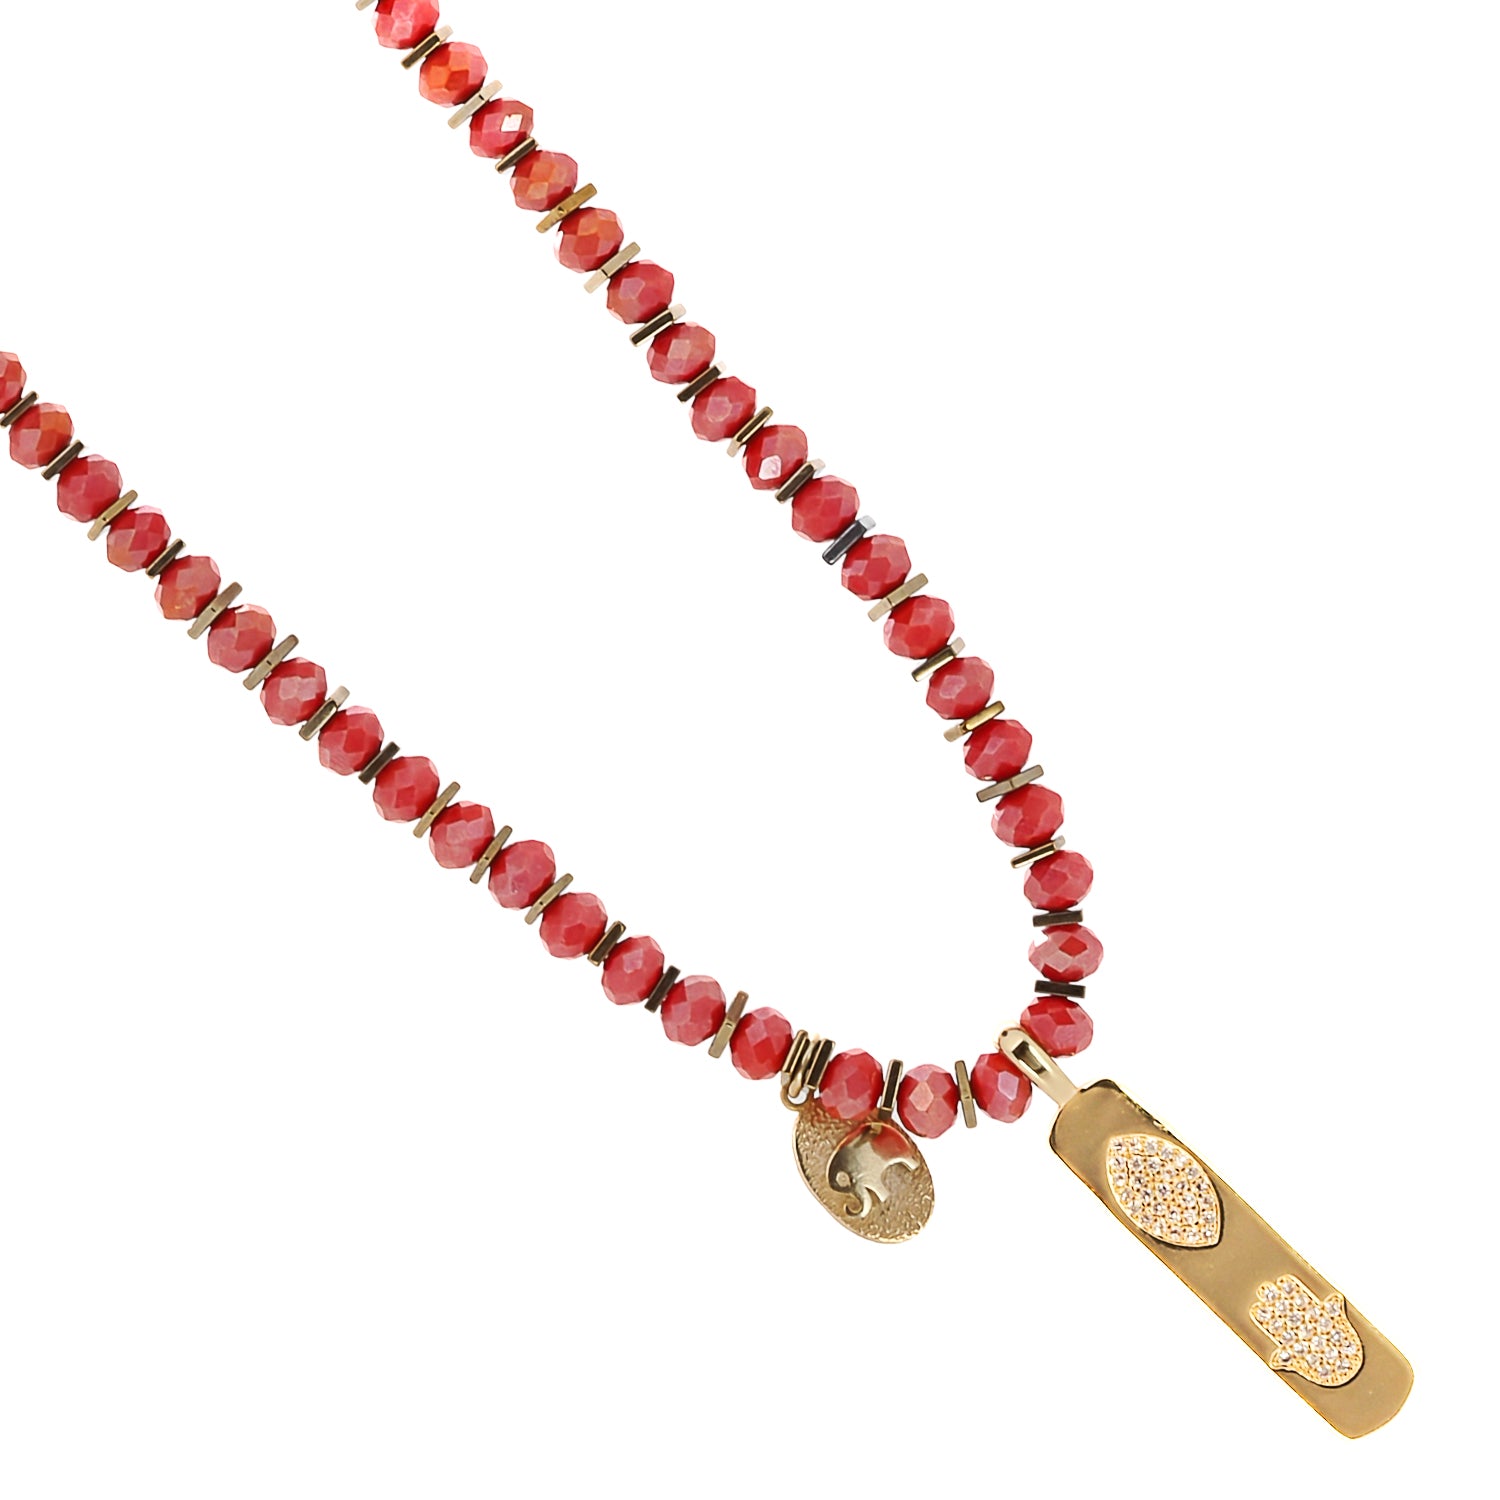 Versatile Summer Journey Necklace with vibrant orange crystals and meaningful symbolism